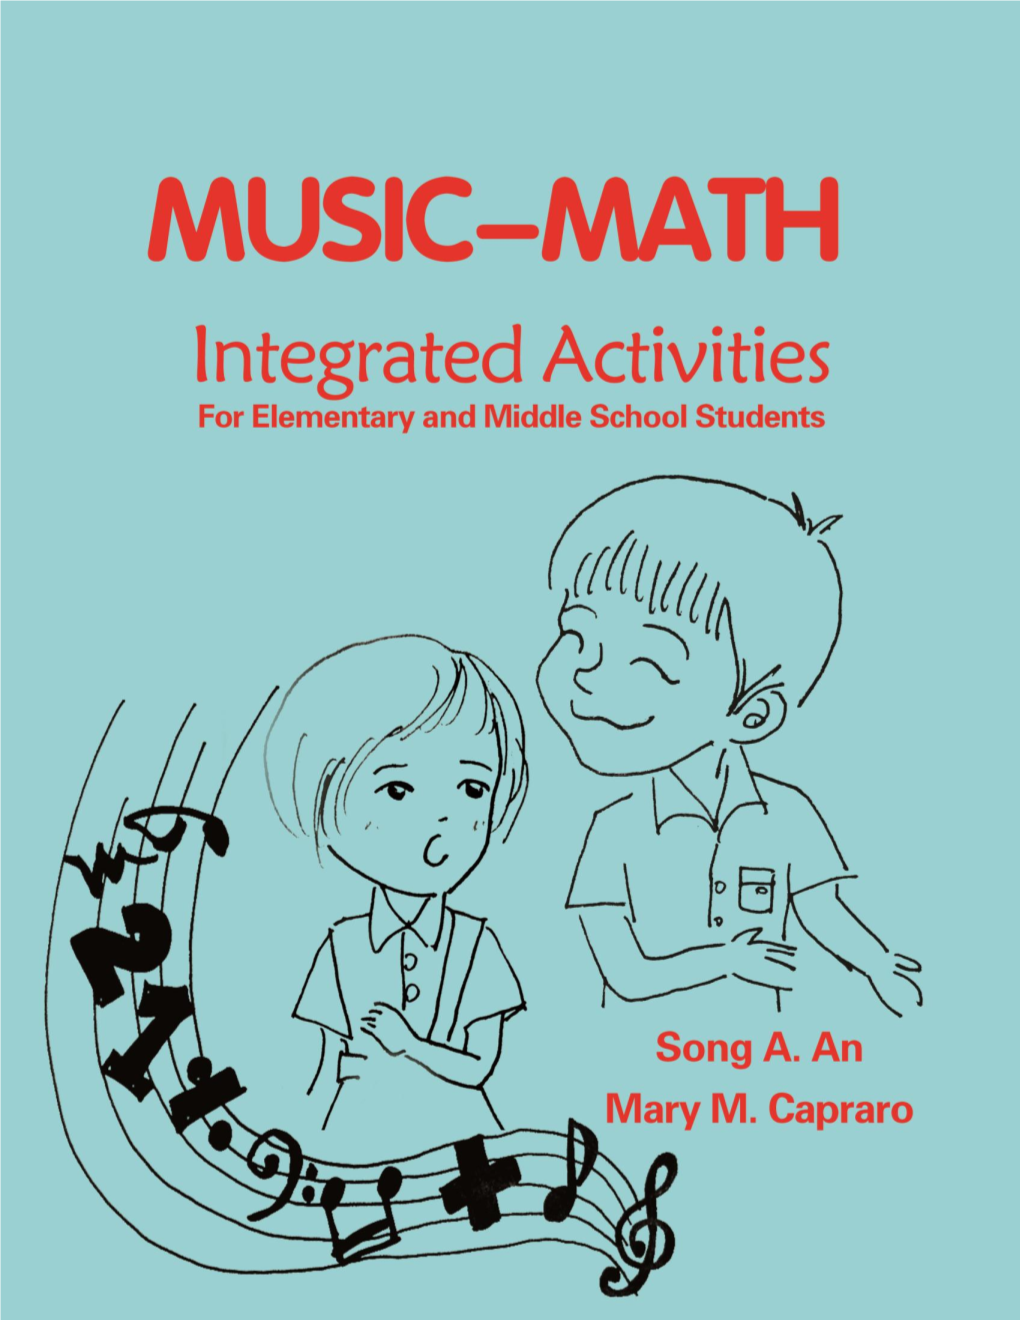 Music-Math Integrated Activities for Elementary and Middle School Students